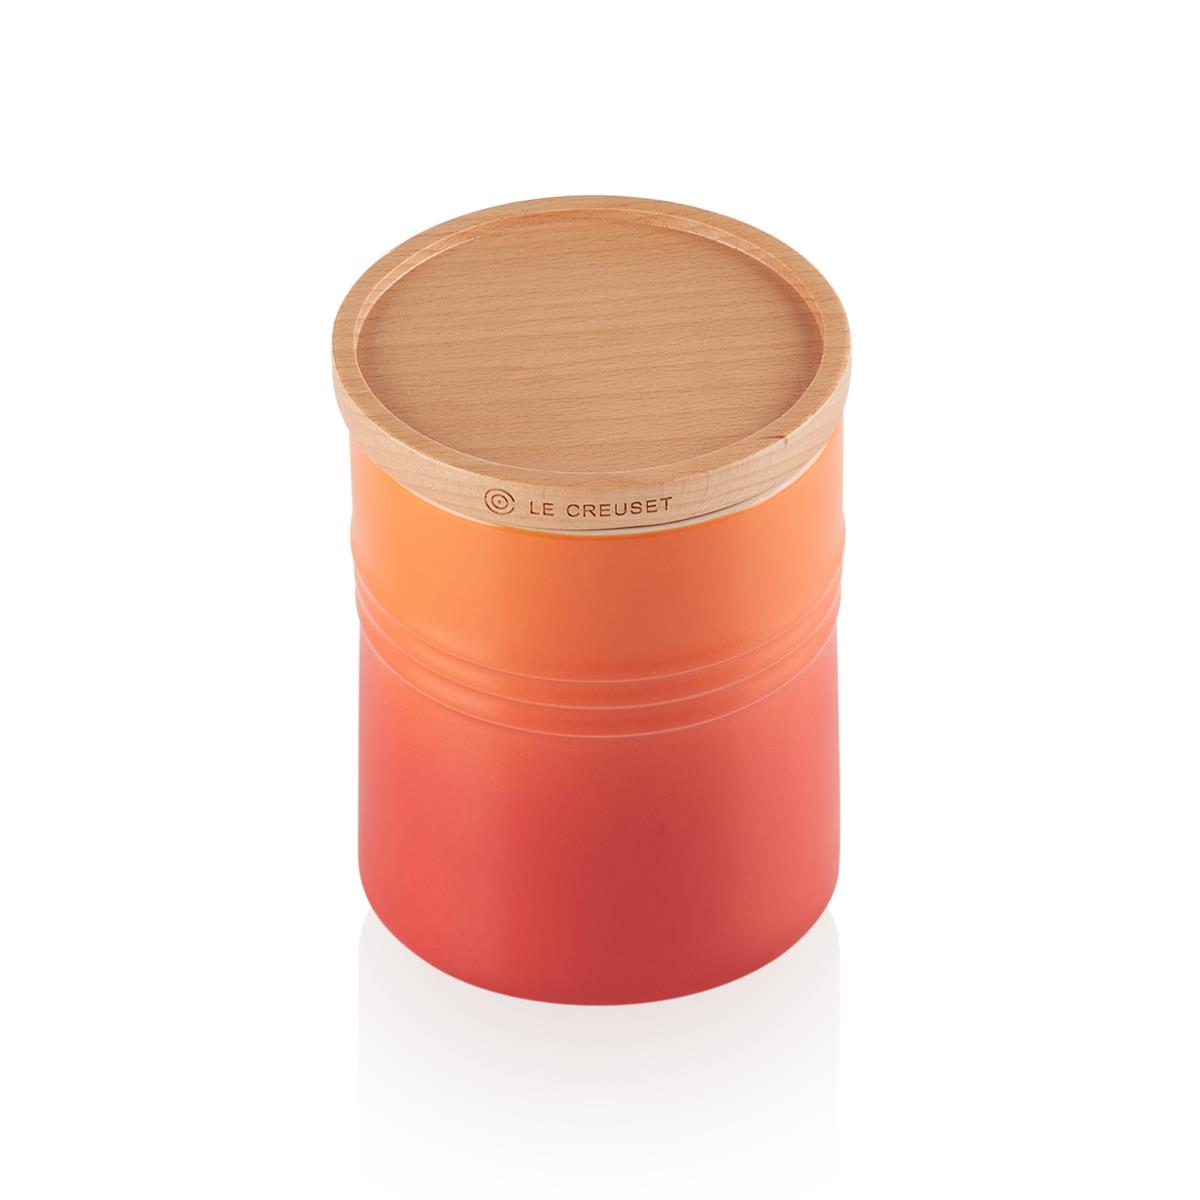 What are the traits of the le creuset storage jar?